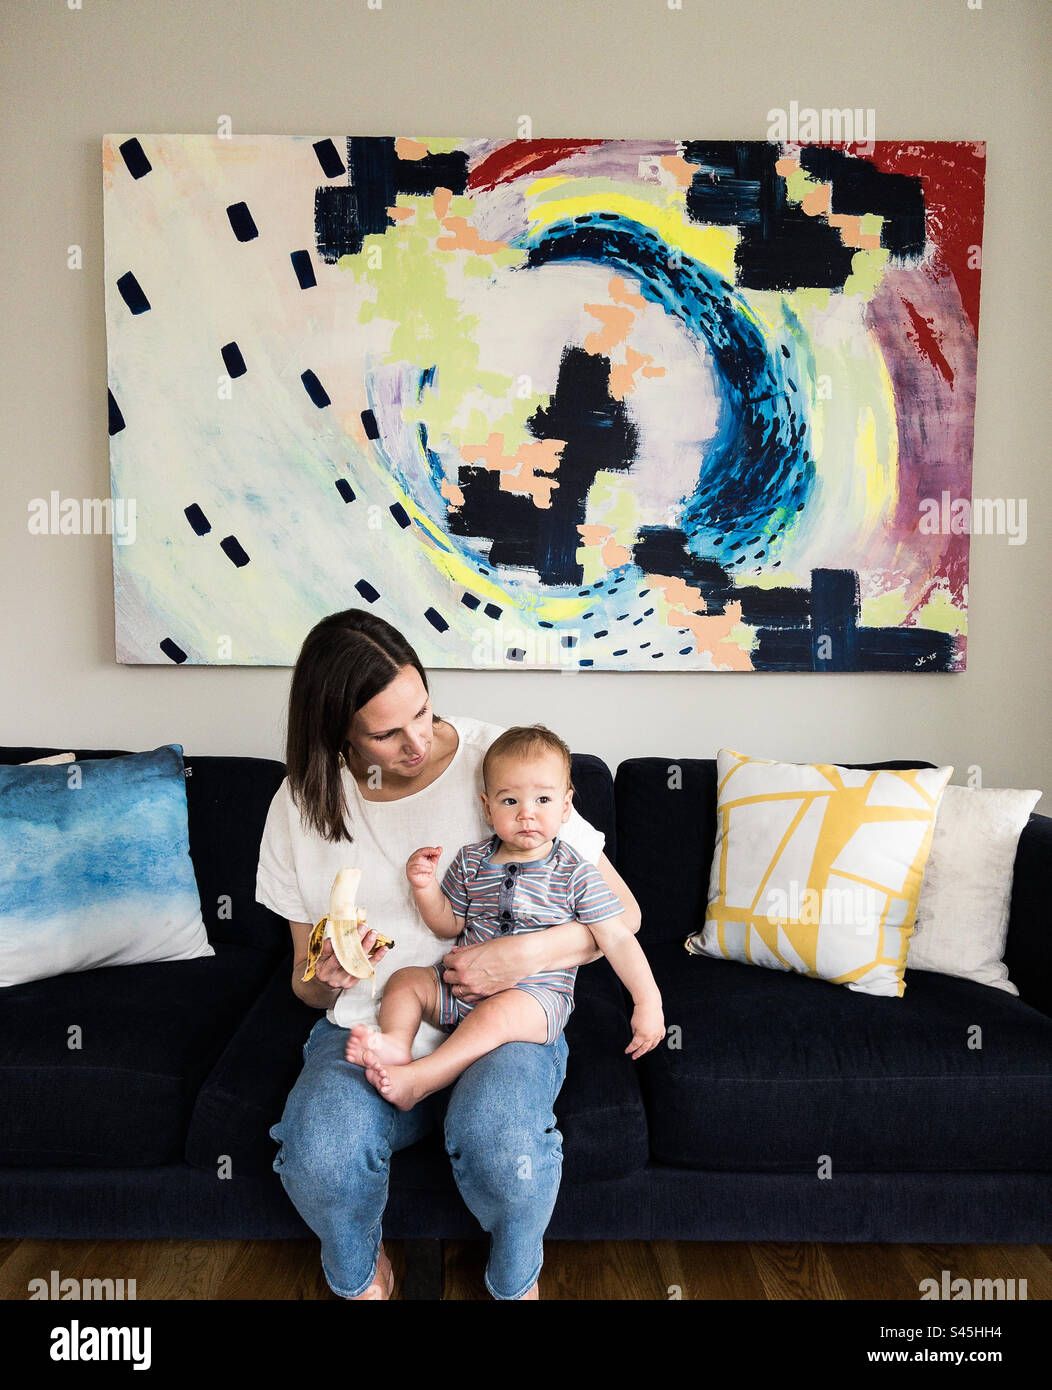 Mother and son eating a banana in front of a colorful piece of art Stock Photo